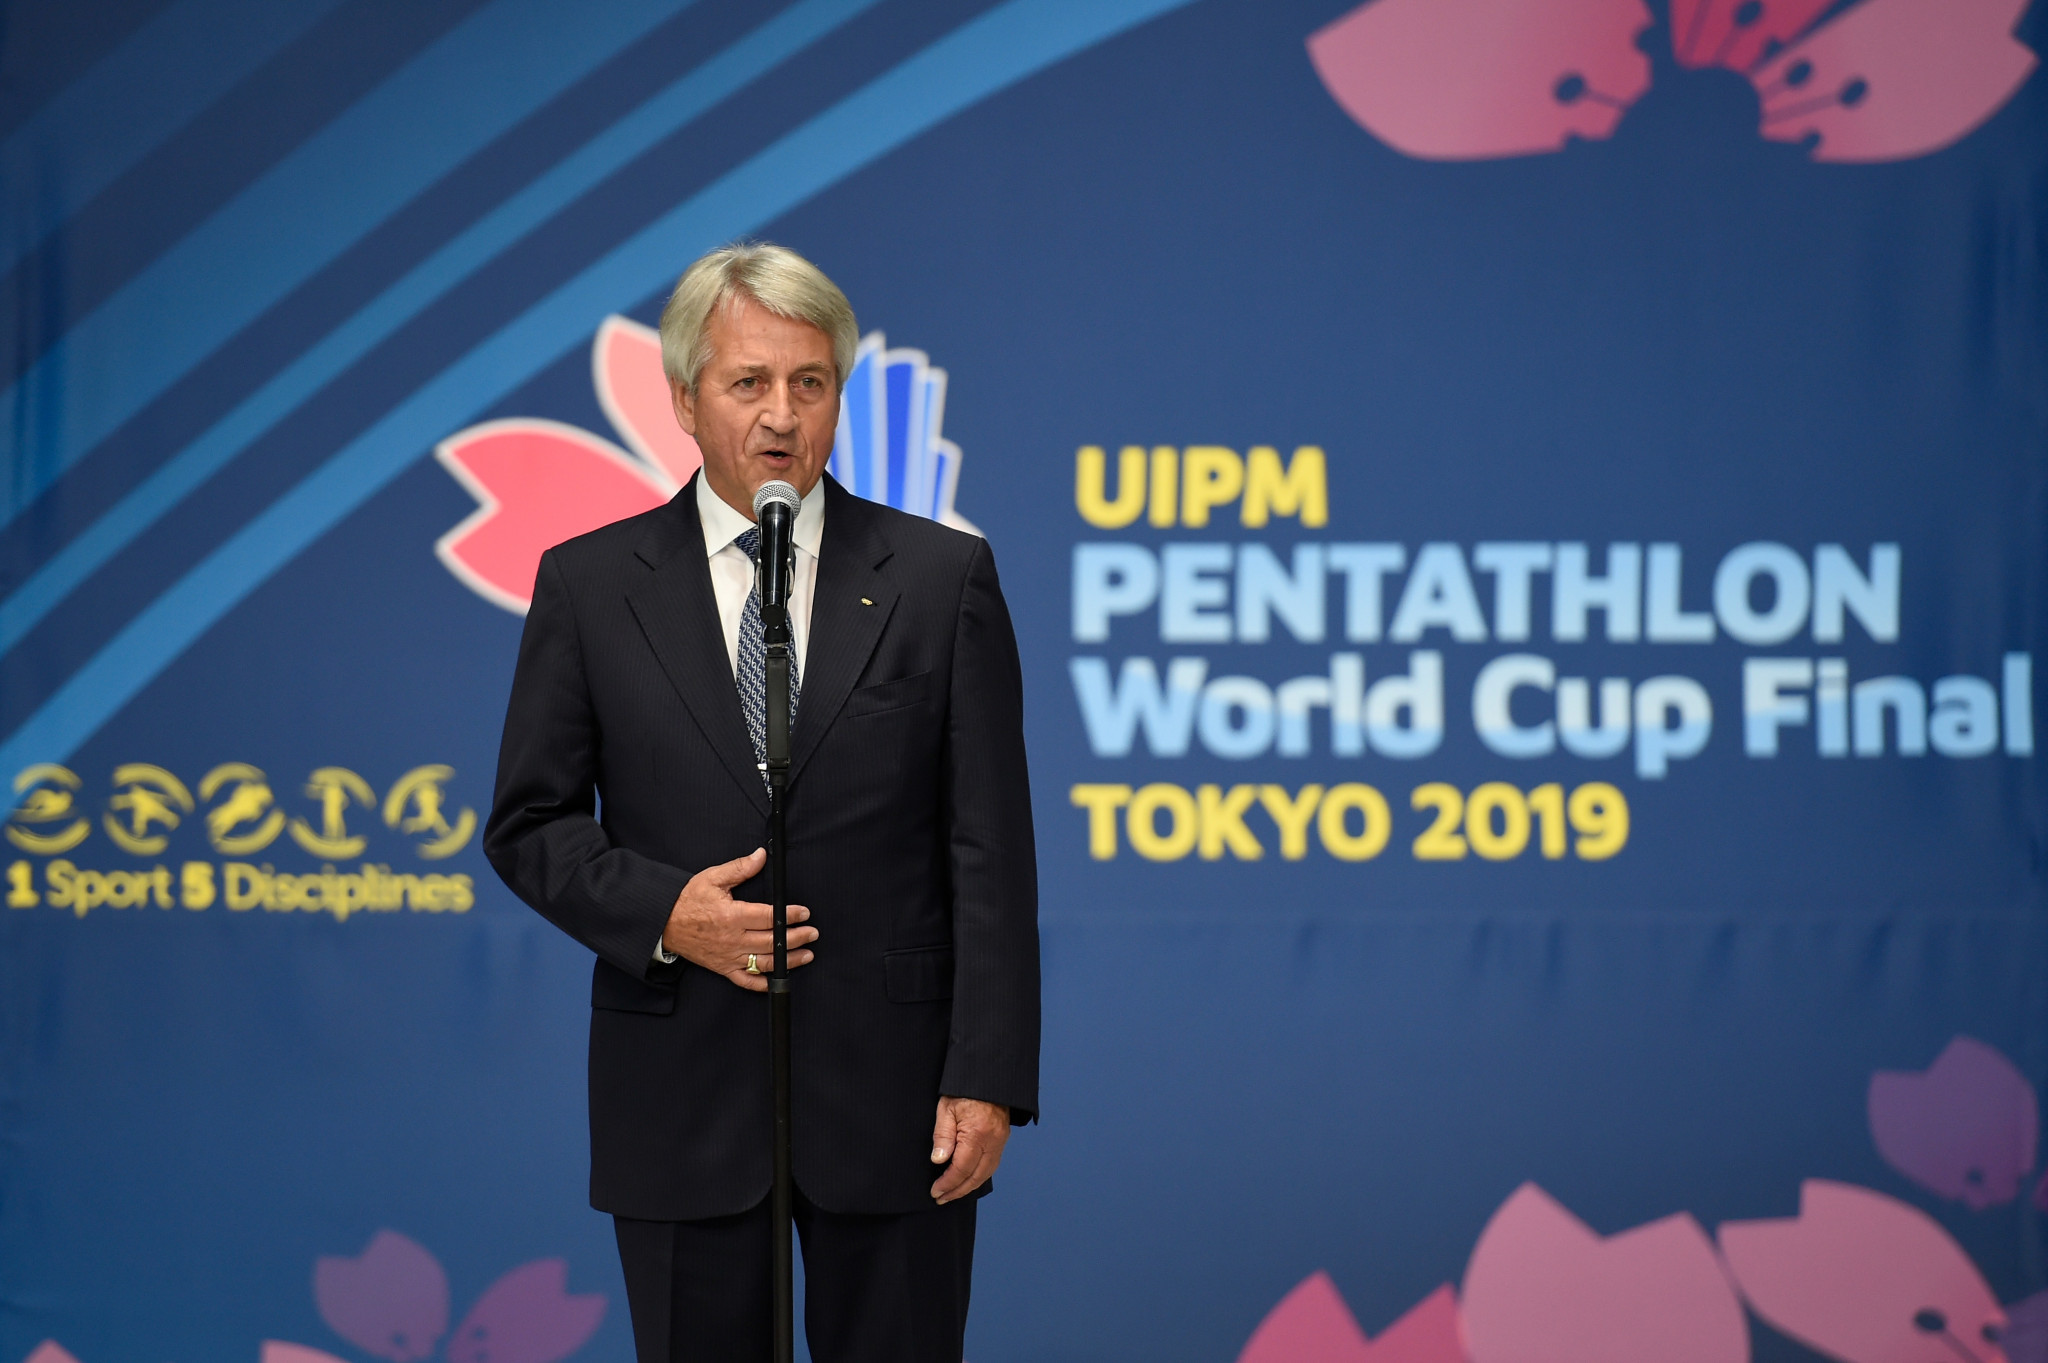 Exclusive: More than 650 modern pentathletes issue vote of no confidence in UIPM President Schormann